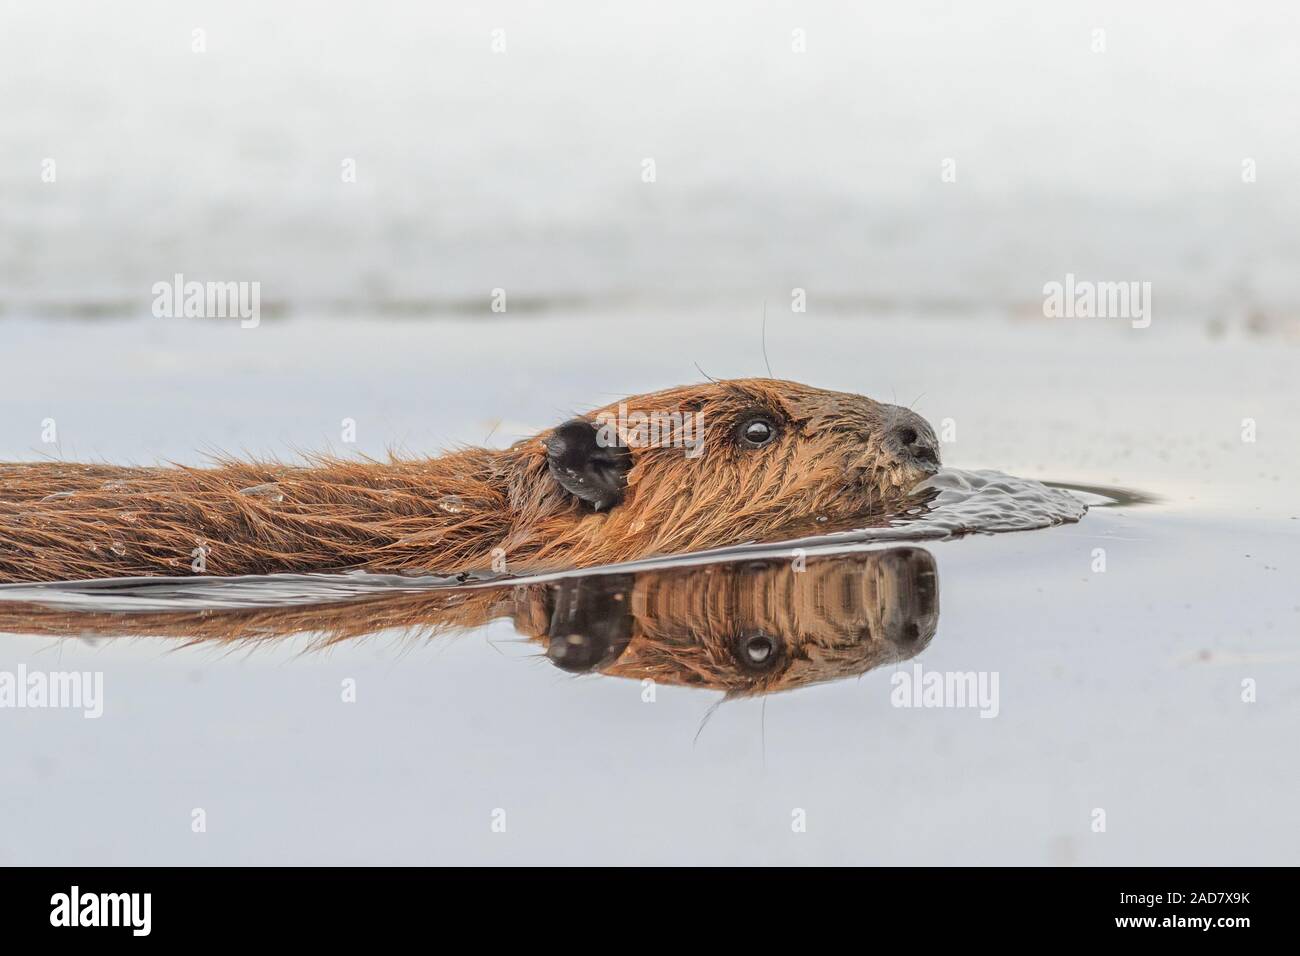 A Beaver swims close by in mirror like water. Stock Photo